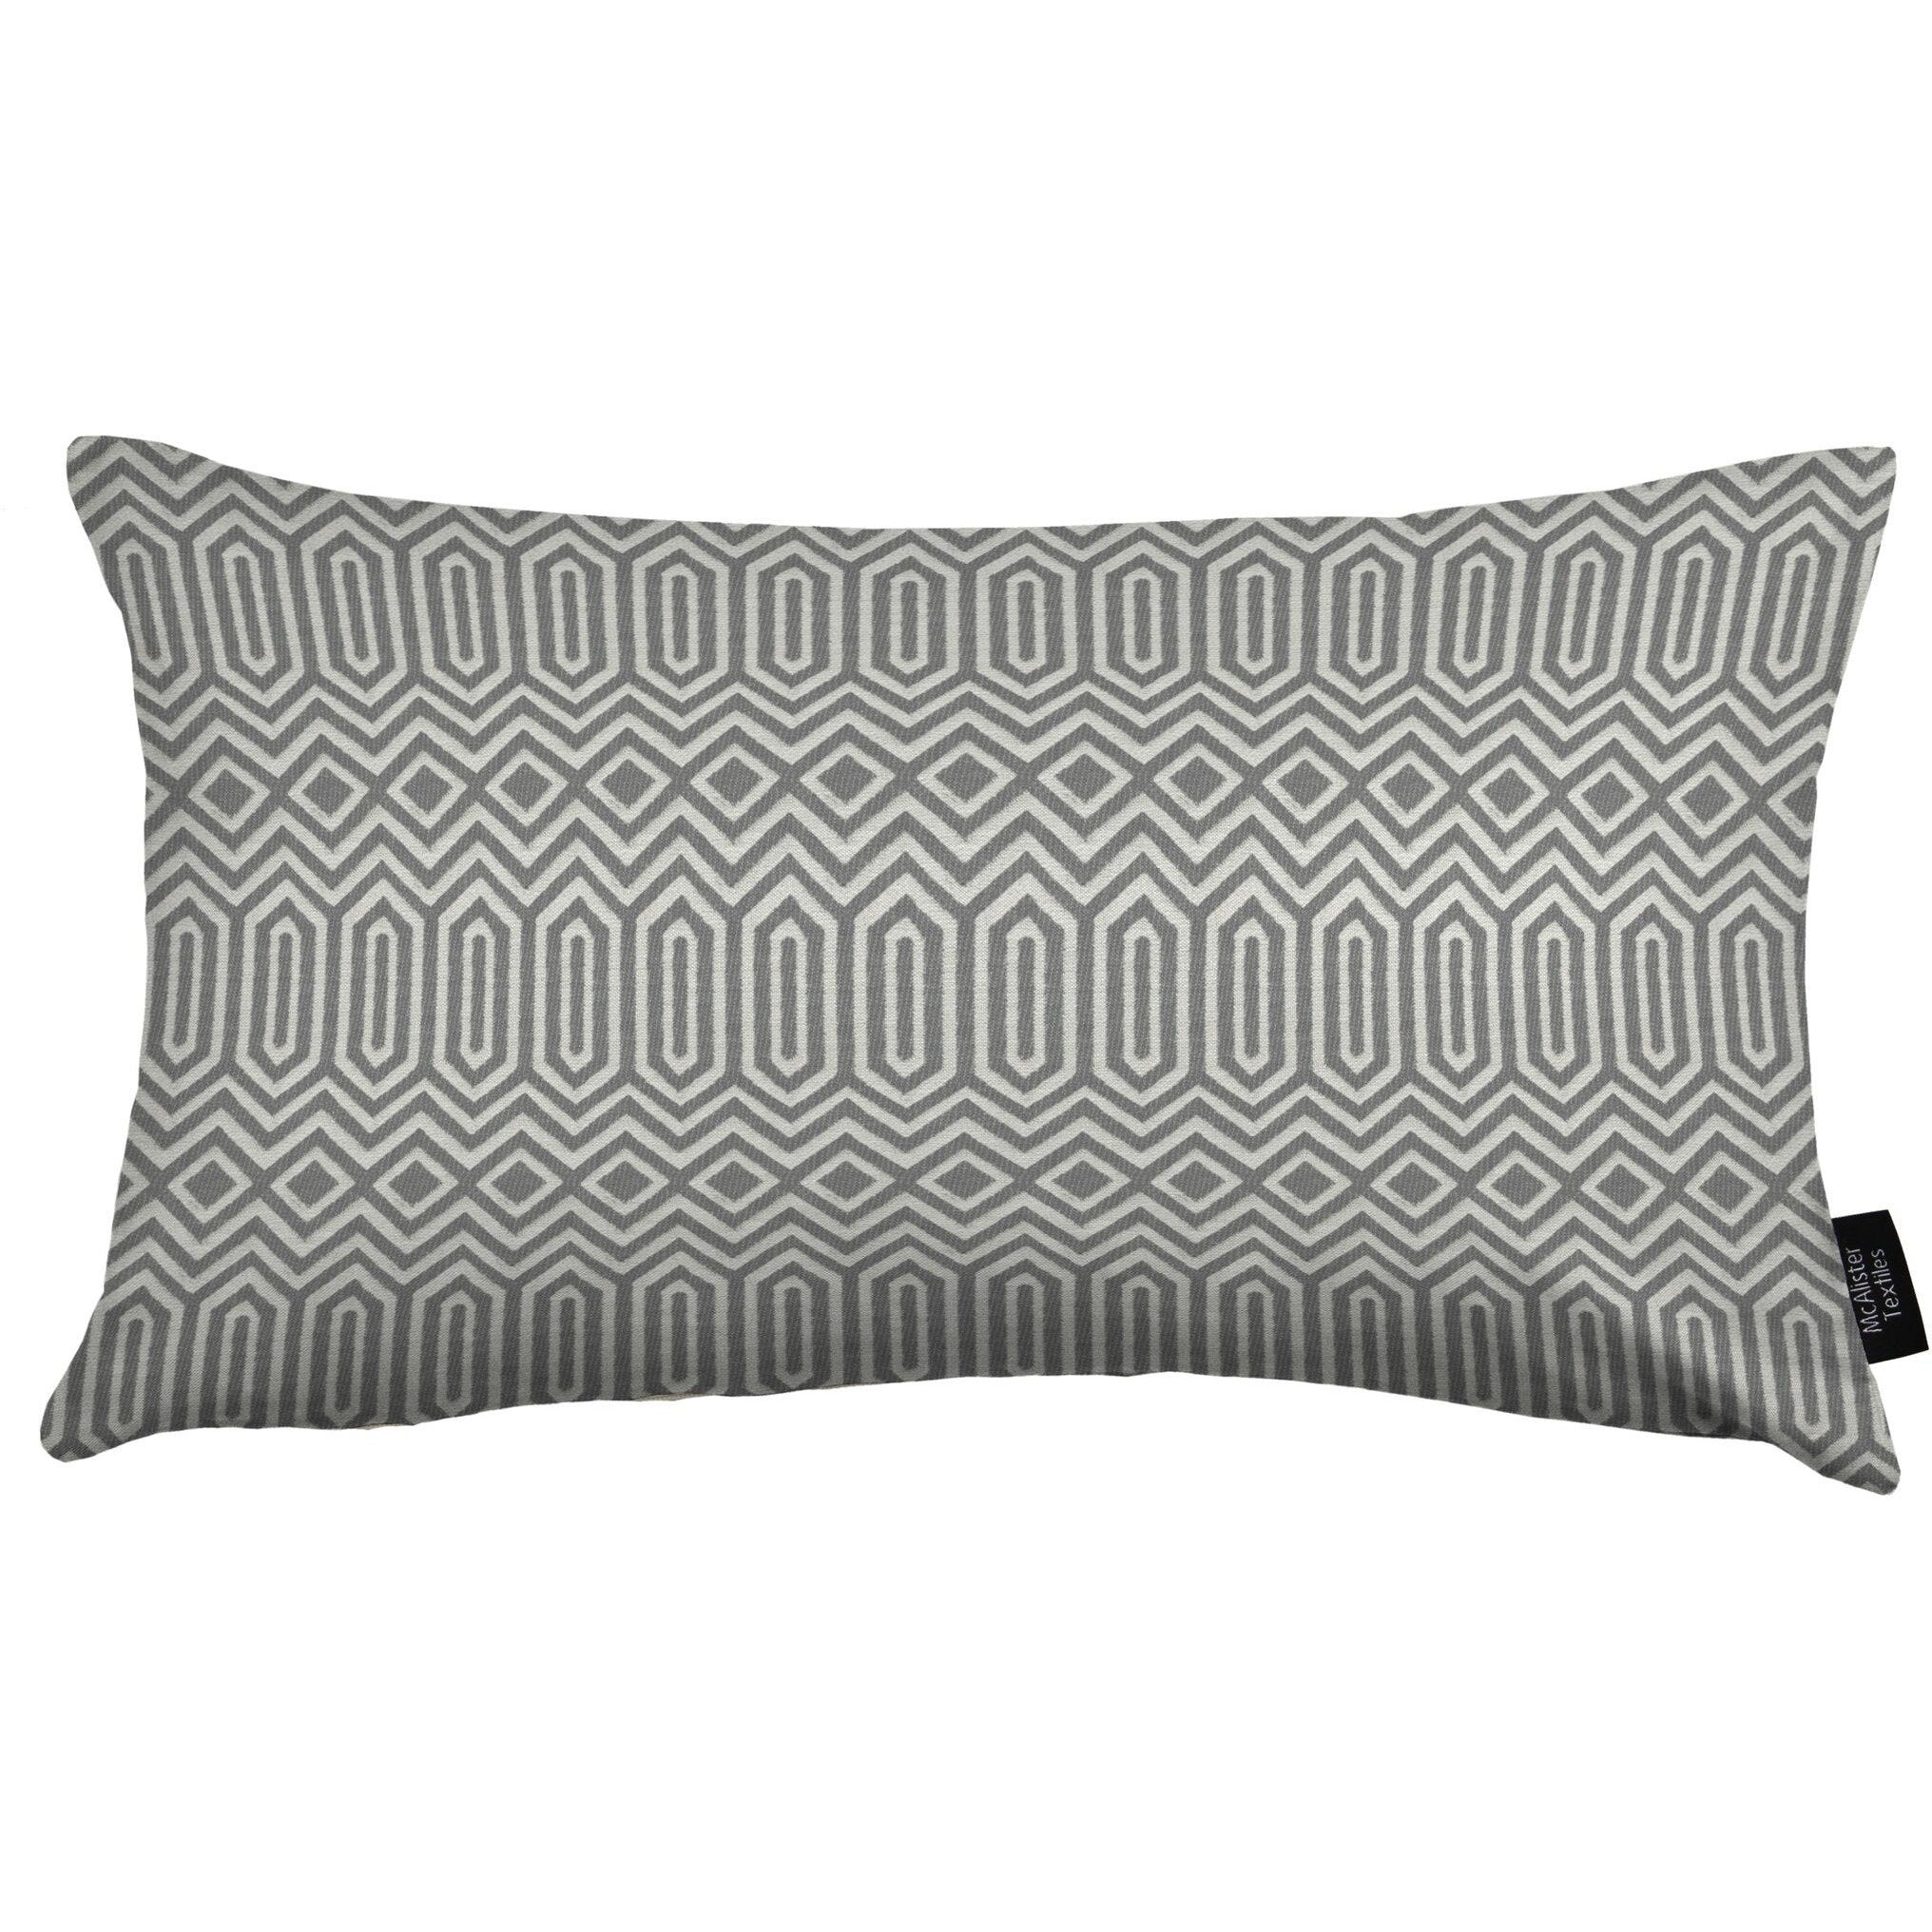 McAlister Textiles Colorado Geometric Charcoal Grey Cushion Cushions and Covers Cover Only 50cm x 30cm 